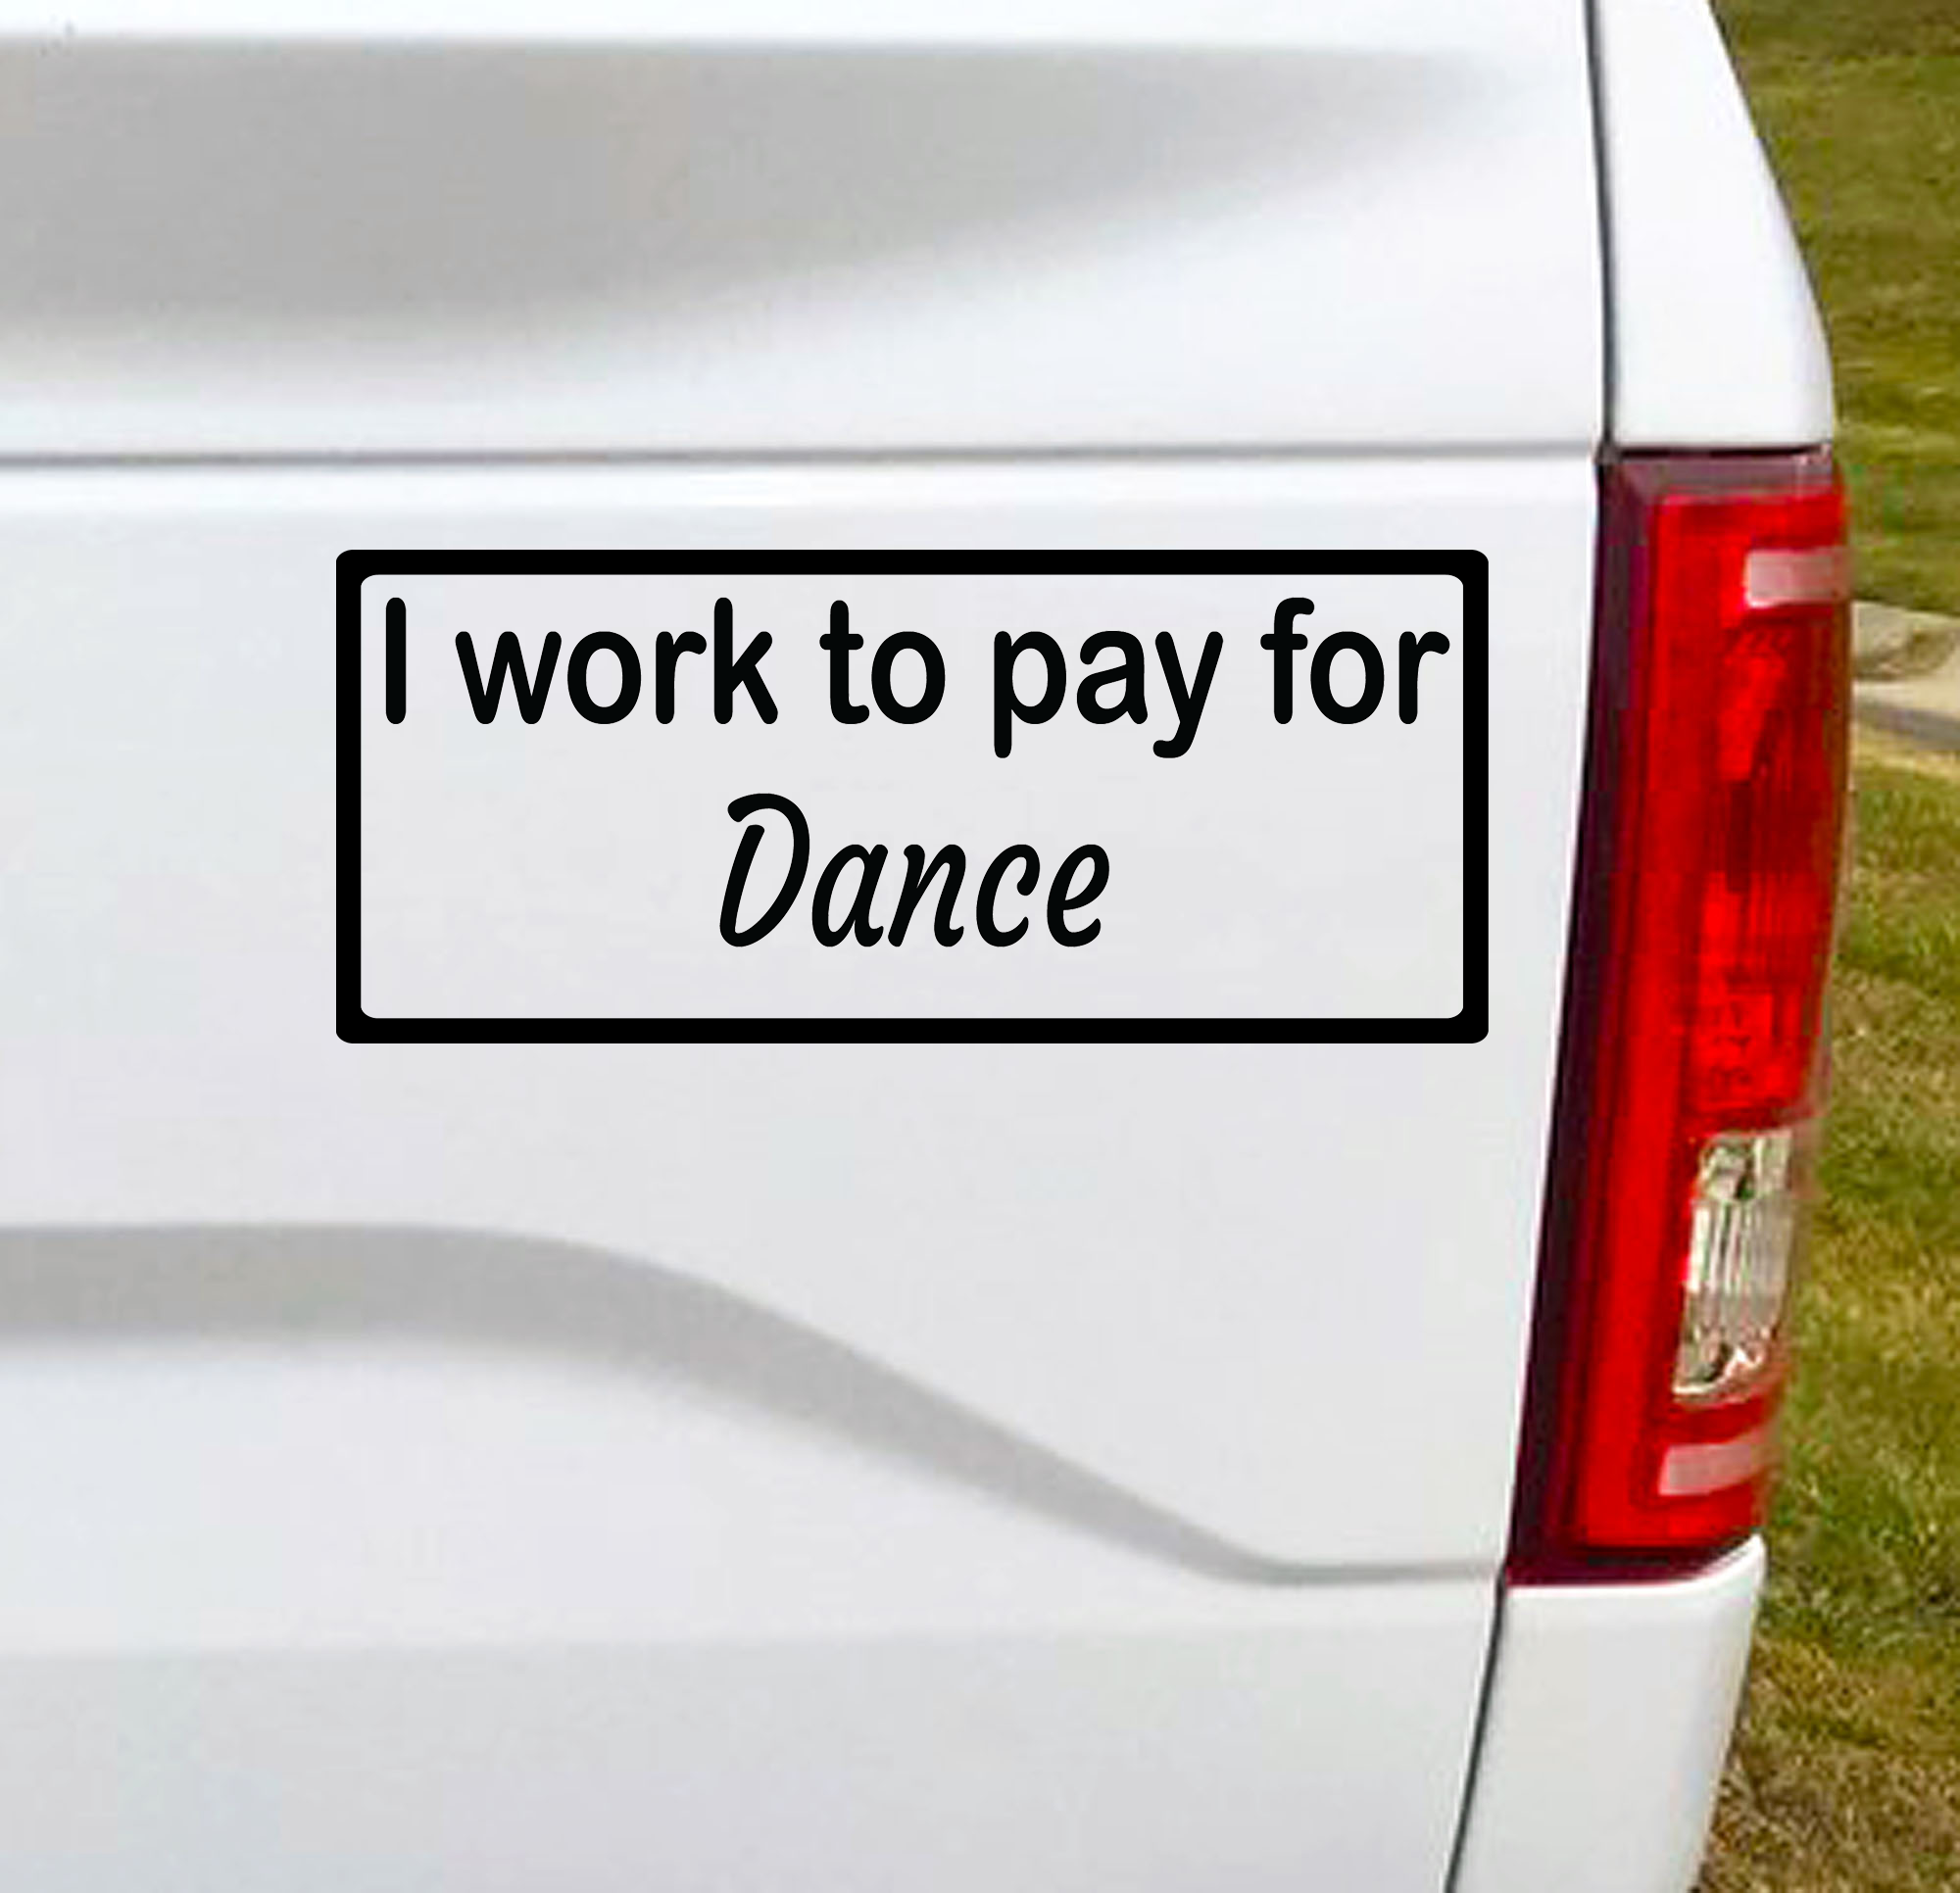 I work to pay for Dance. Baseball? Football? You fill in the blank. This funny car vinyl decal bumper sticker will surely get a laugh out of your fellow drivers.  7"W x 3"H Funny Car Decal, Car Sticker, Car Vinyl, Bumper Sticker, Vinyl Stickers, Vinyl Sticker.